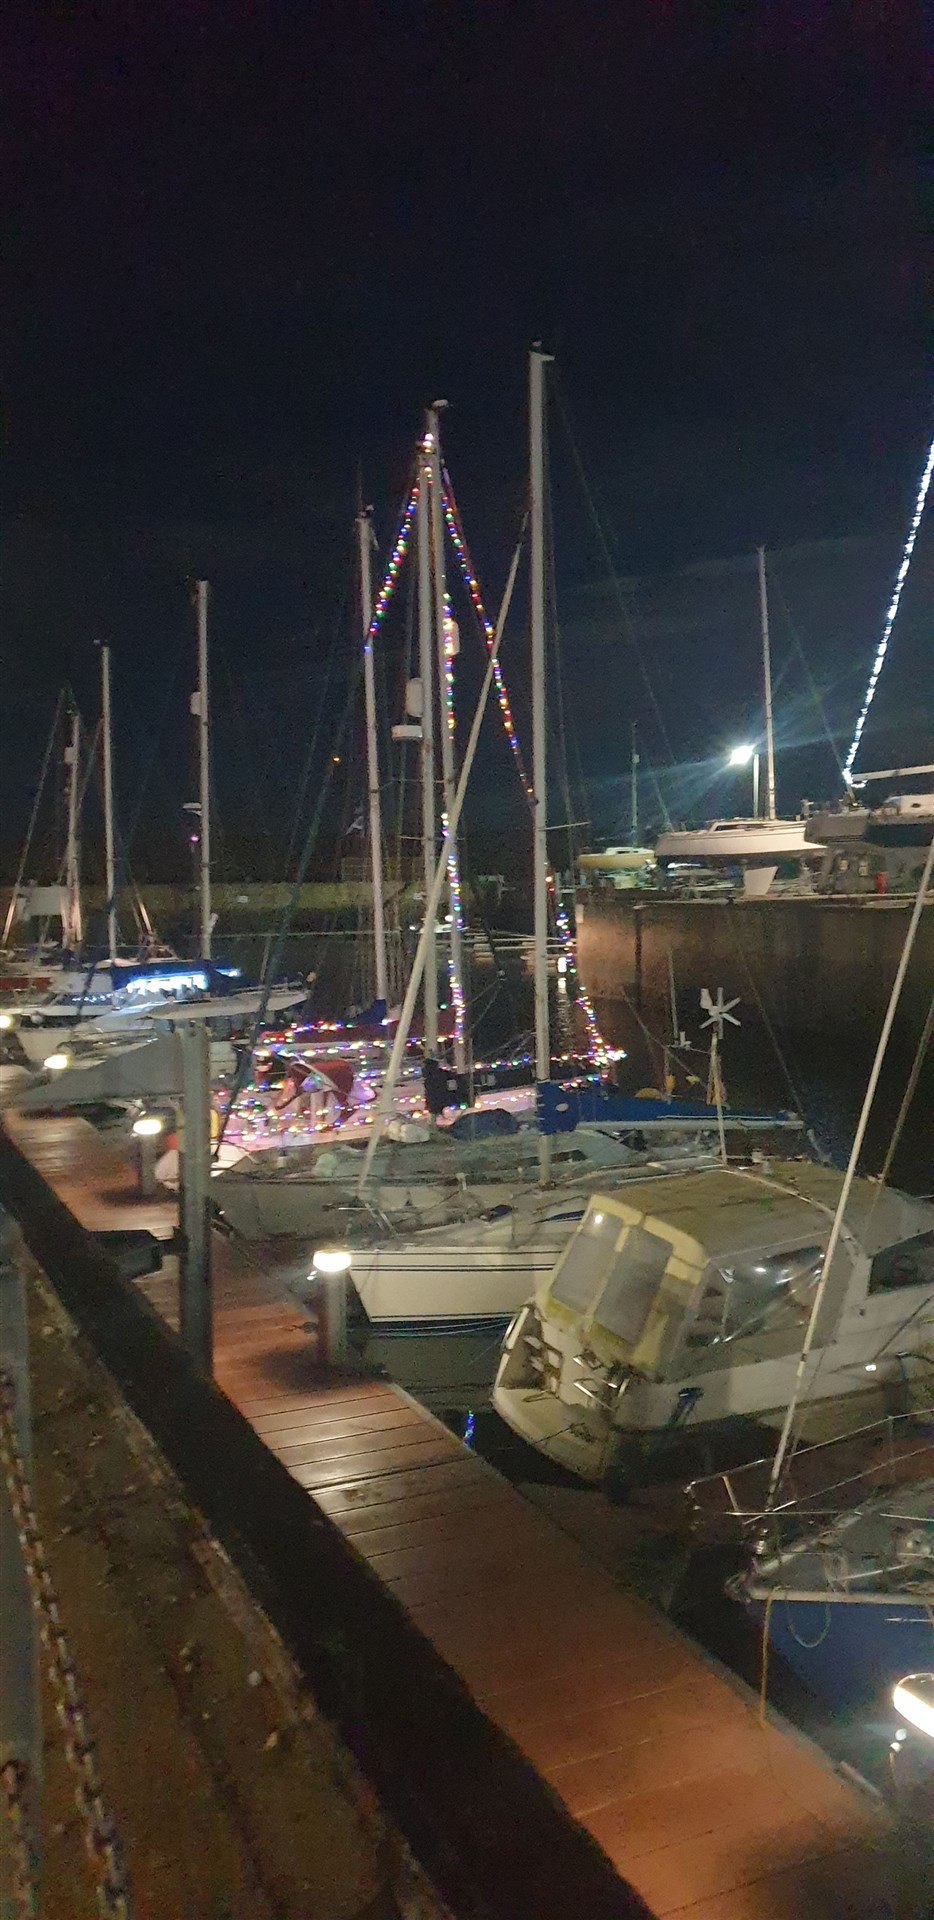 Even some of the yachts in the marina are illuminated for Christmas.